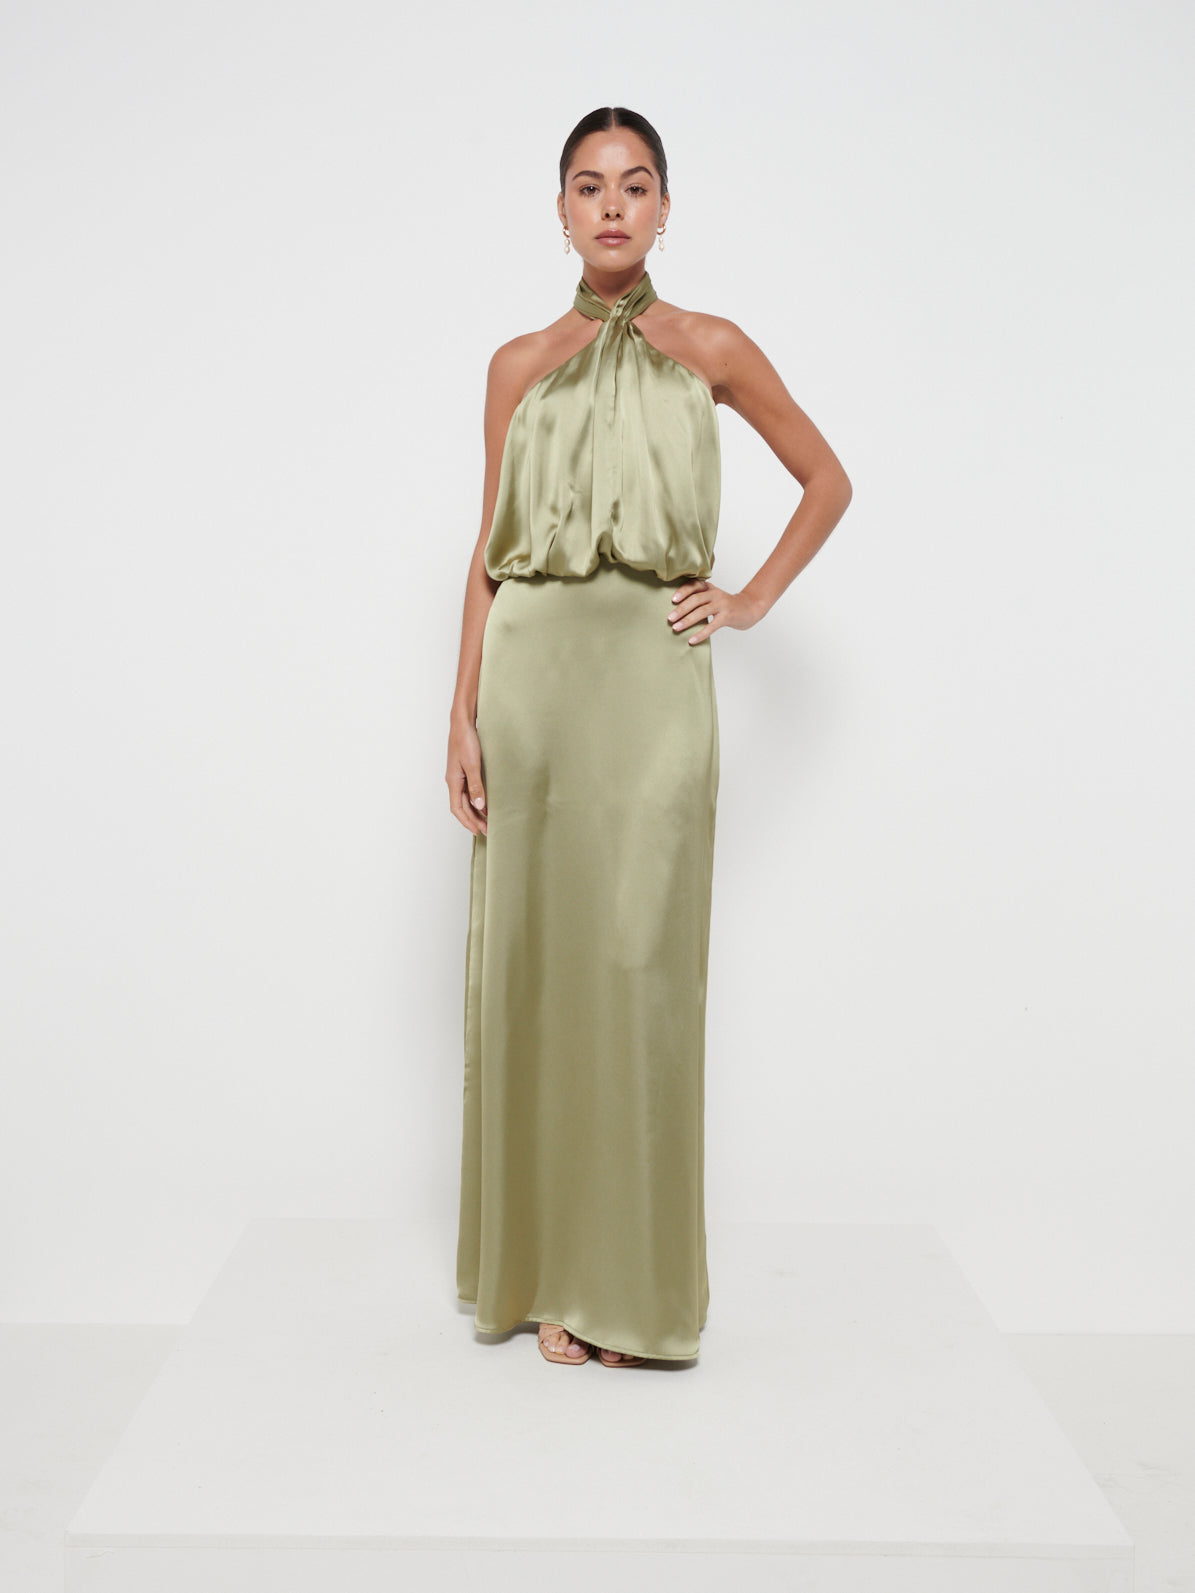 Sammie Recycled Maxi Bridesmaid Dress - Matte Olive